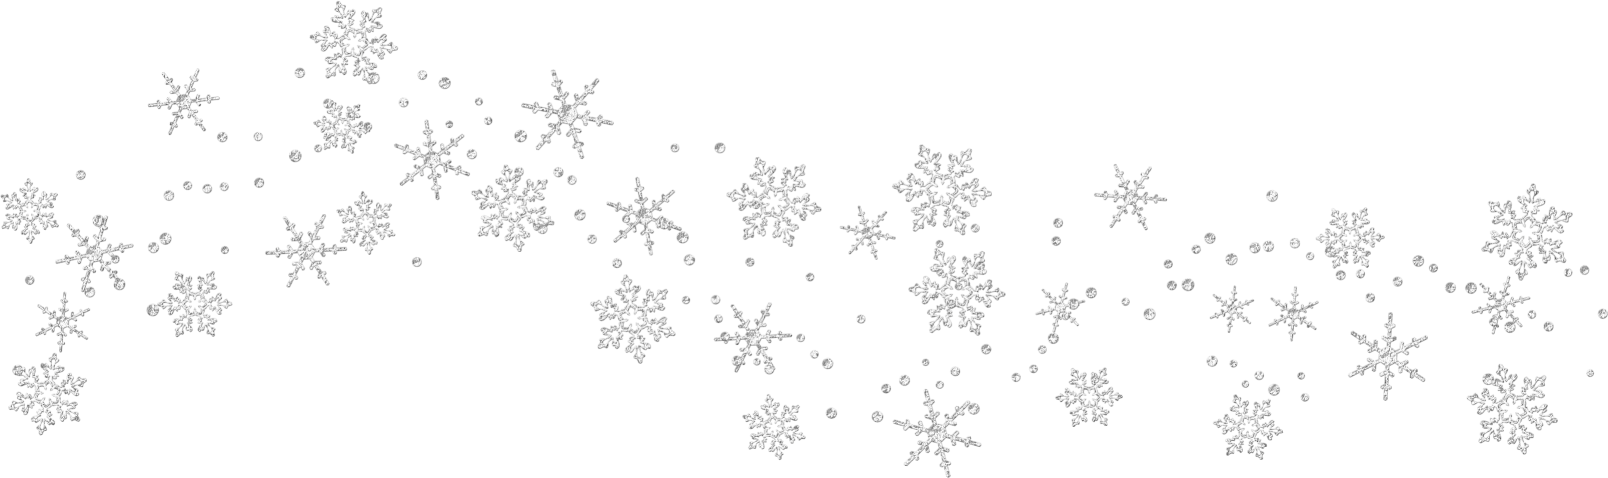 Clipart Of Snowflakes PNG HD Quality